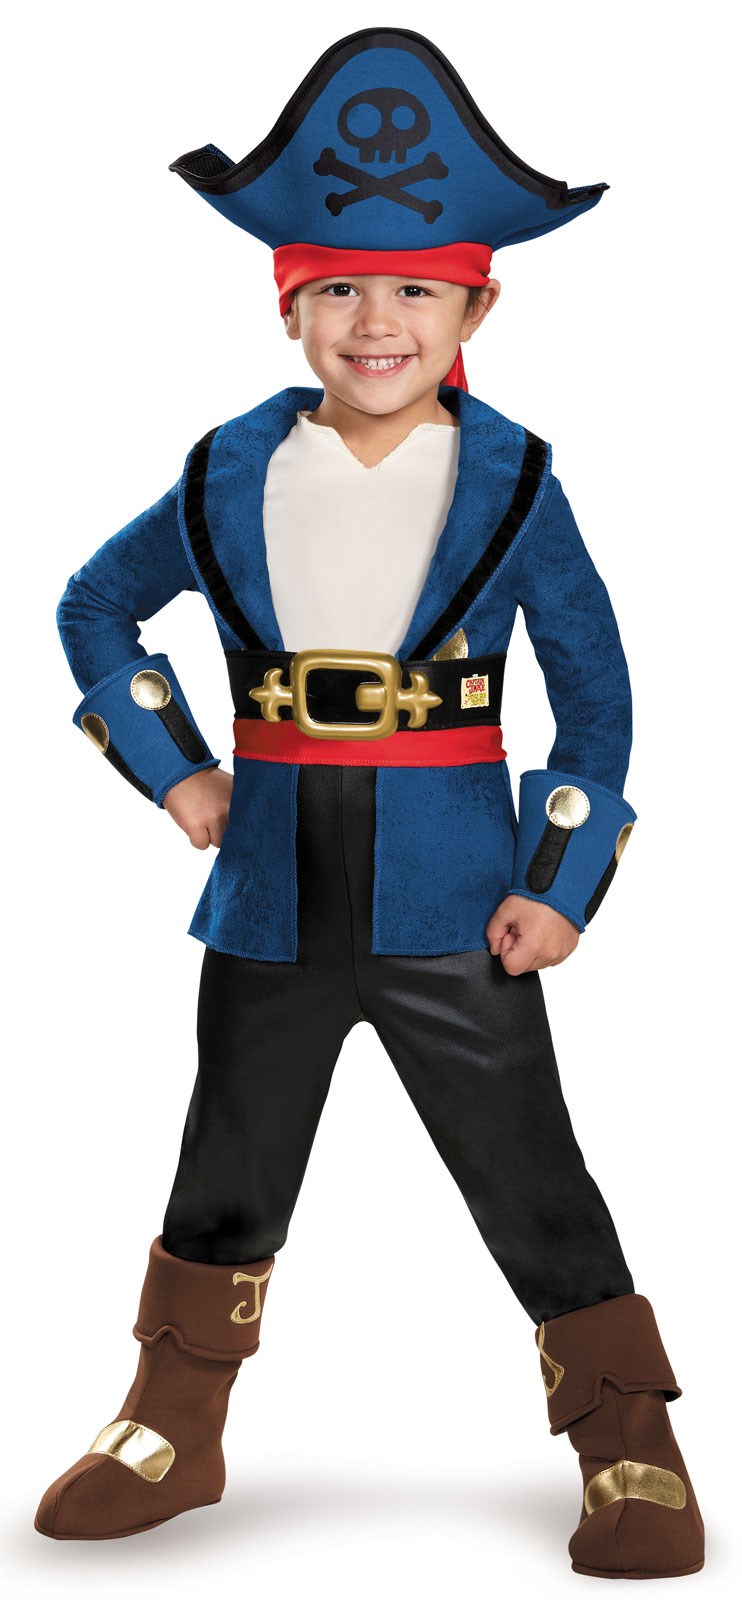 Captain Jake and the Never Land Pirates: Deluxe Captain Jake Costume For Toddlers